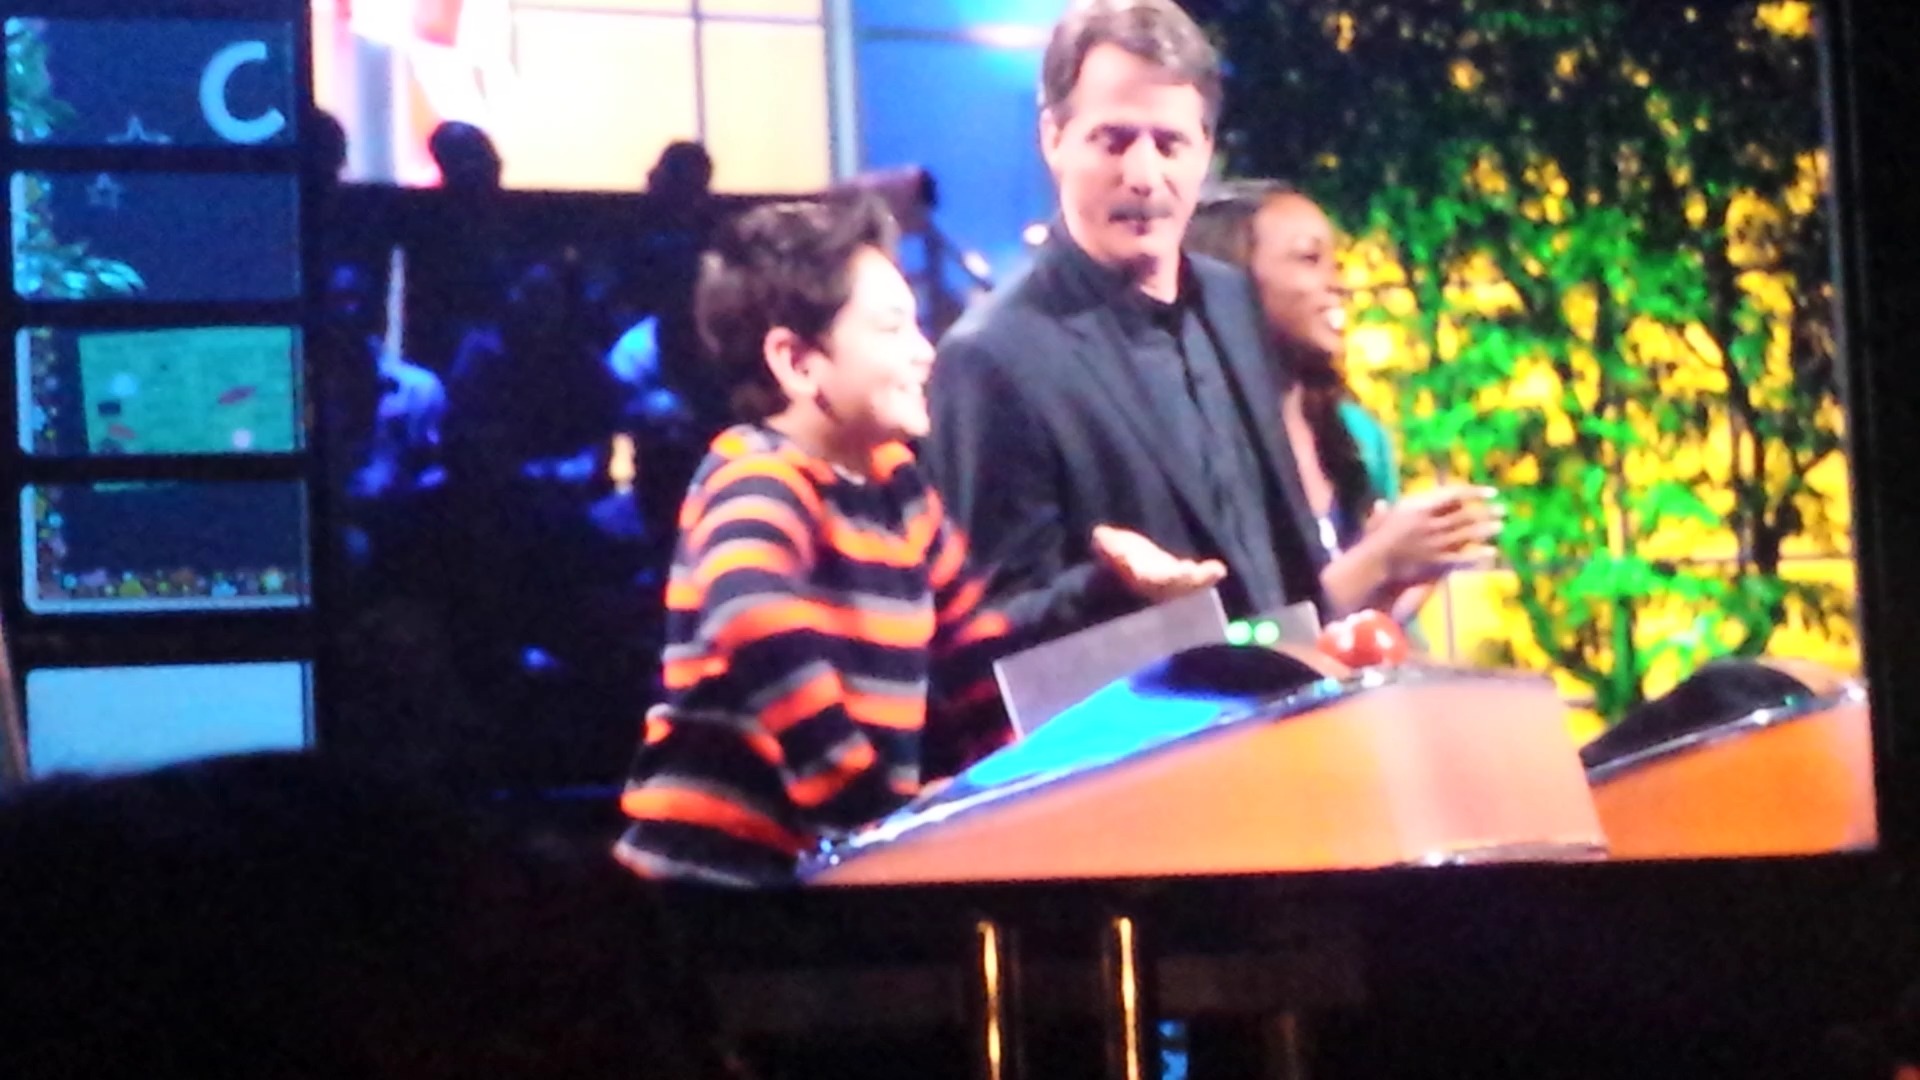 Jeff Foxworhty on set of Are You Smarter Thank A 5th Grader